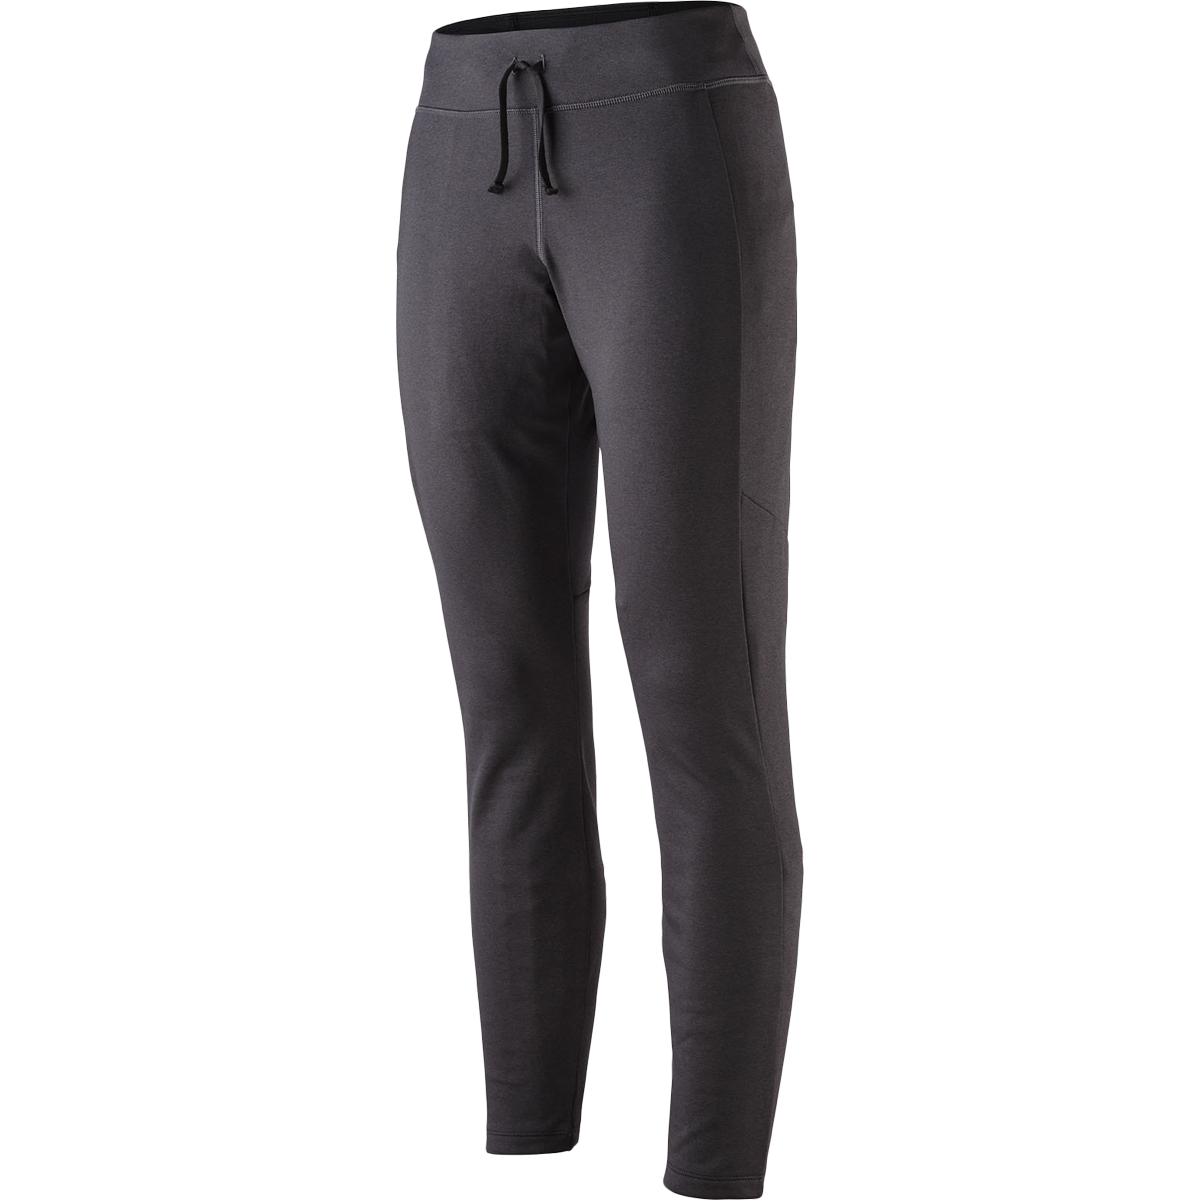 Women's R1 Daily Bottoms alternate view